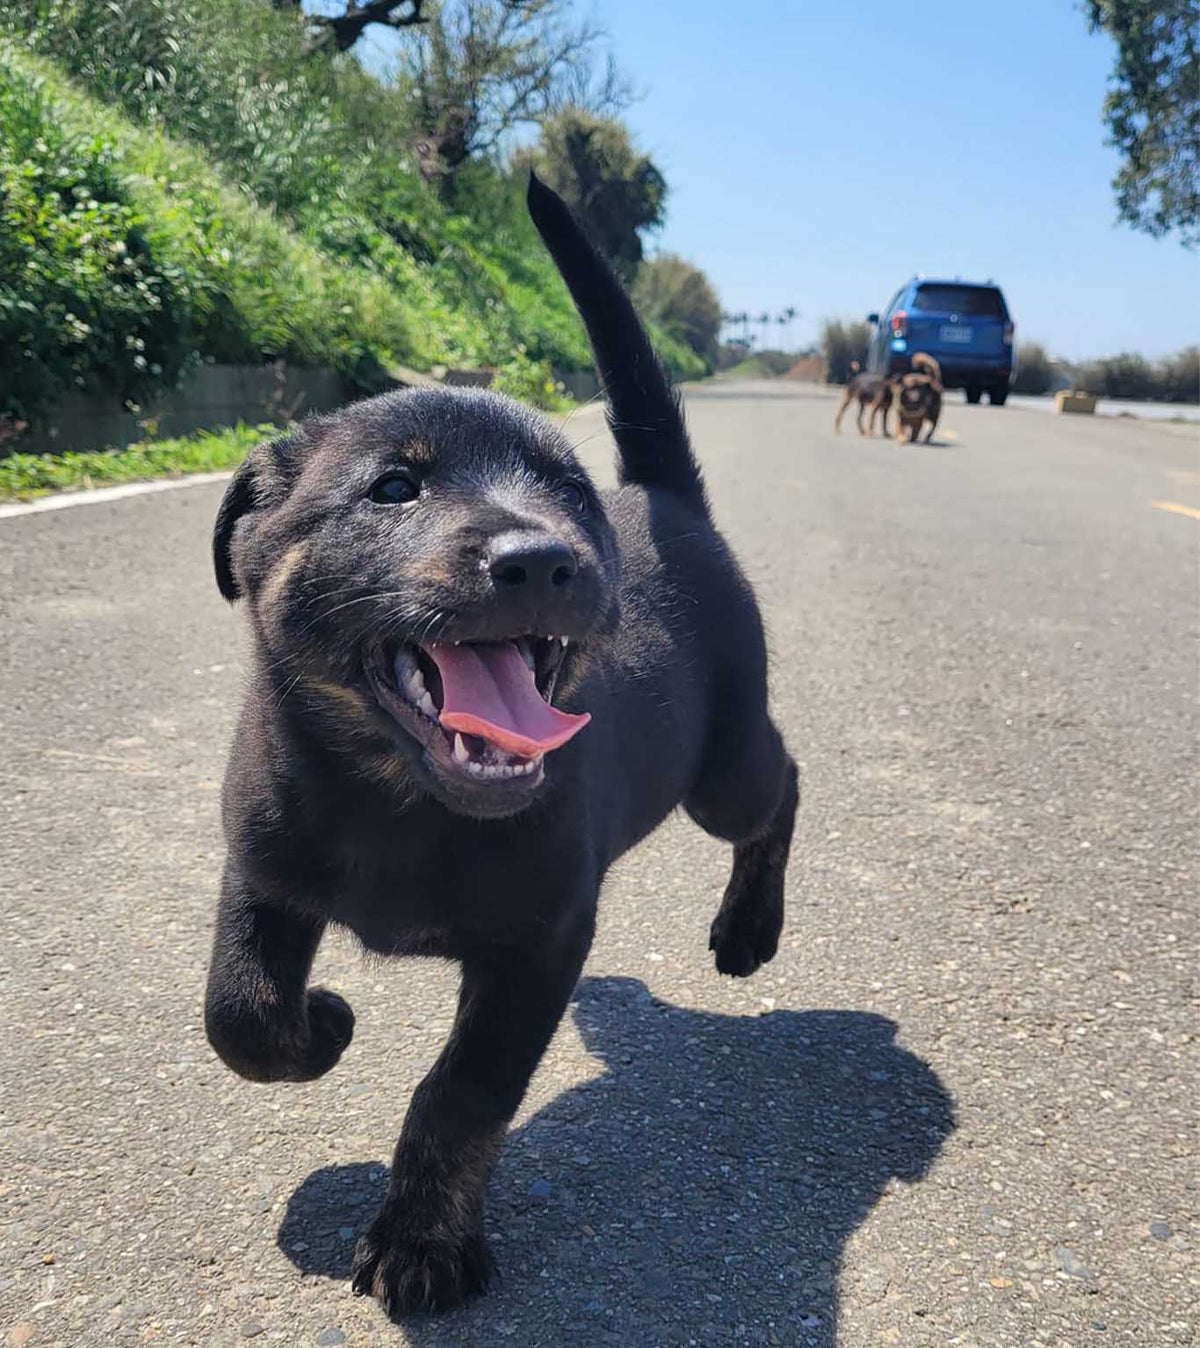 A black puppy rescued in Taiwan ready for adoption for United States and Canada adopters